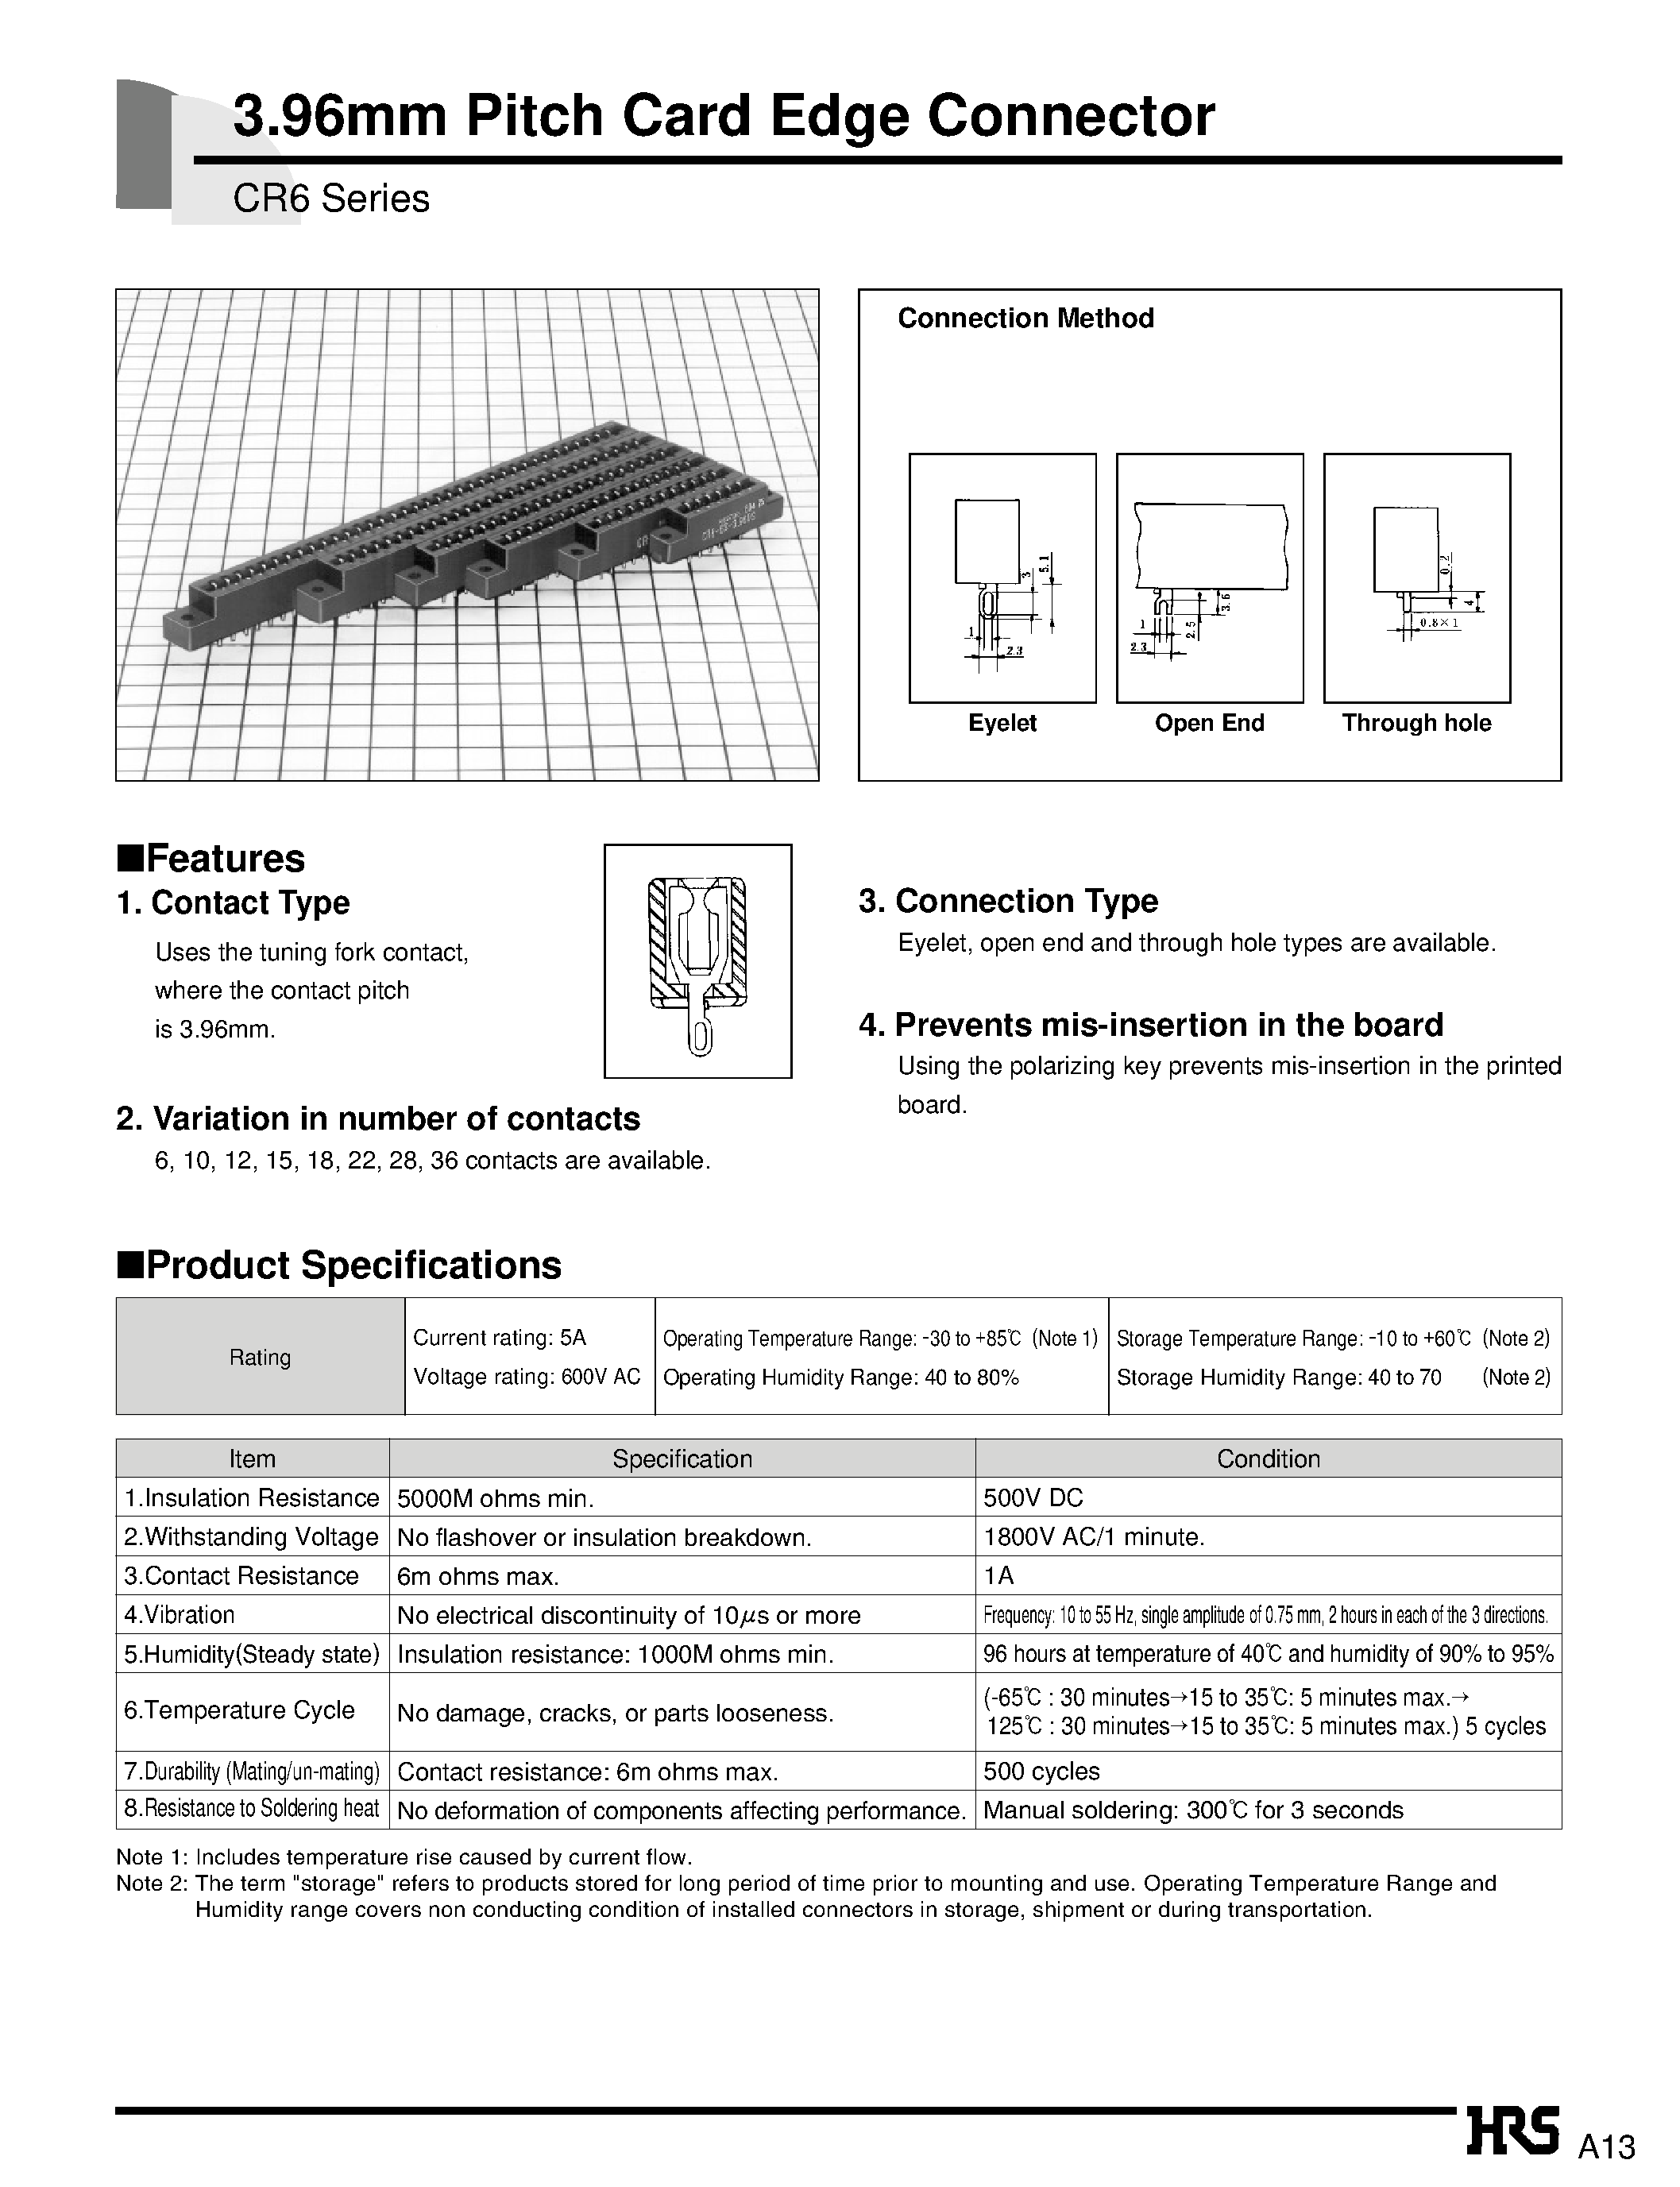 Datasheet CR6-15S-3.96E - 3.96mm Pitch Card Edge Connector page 1